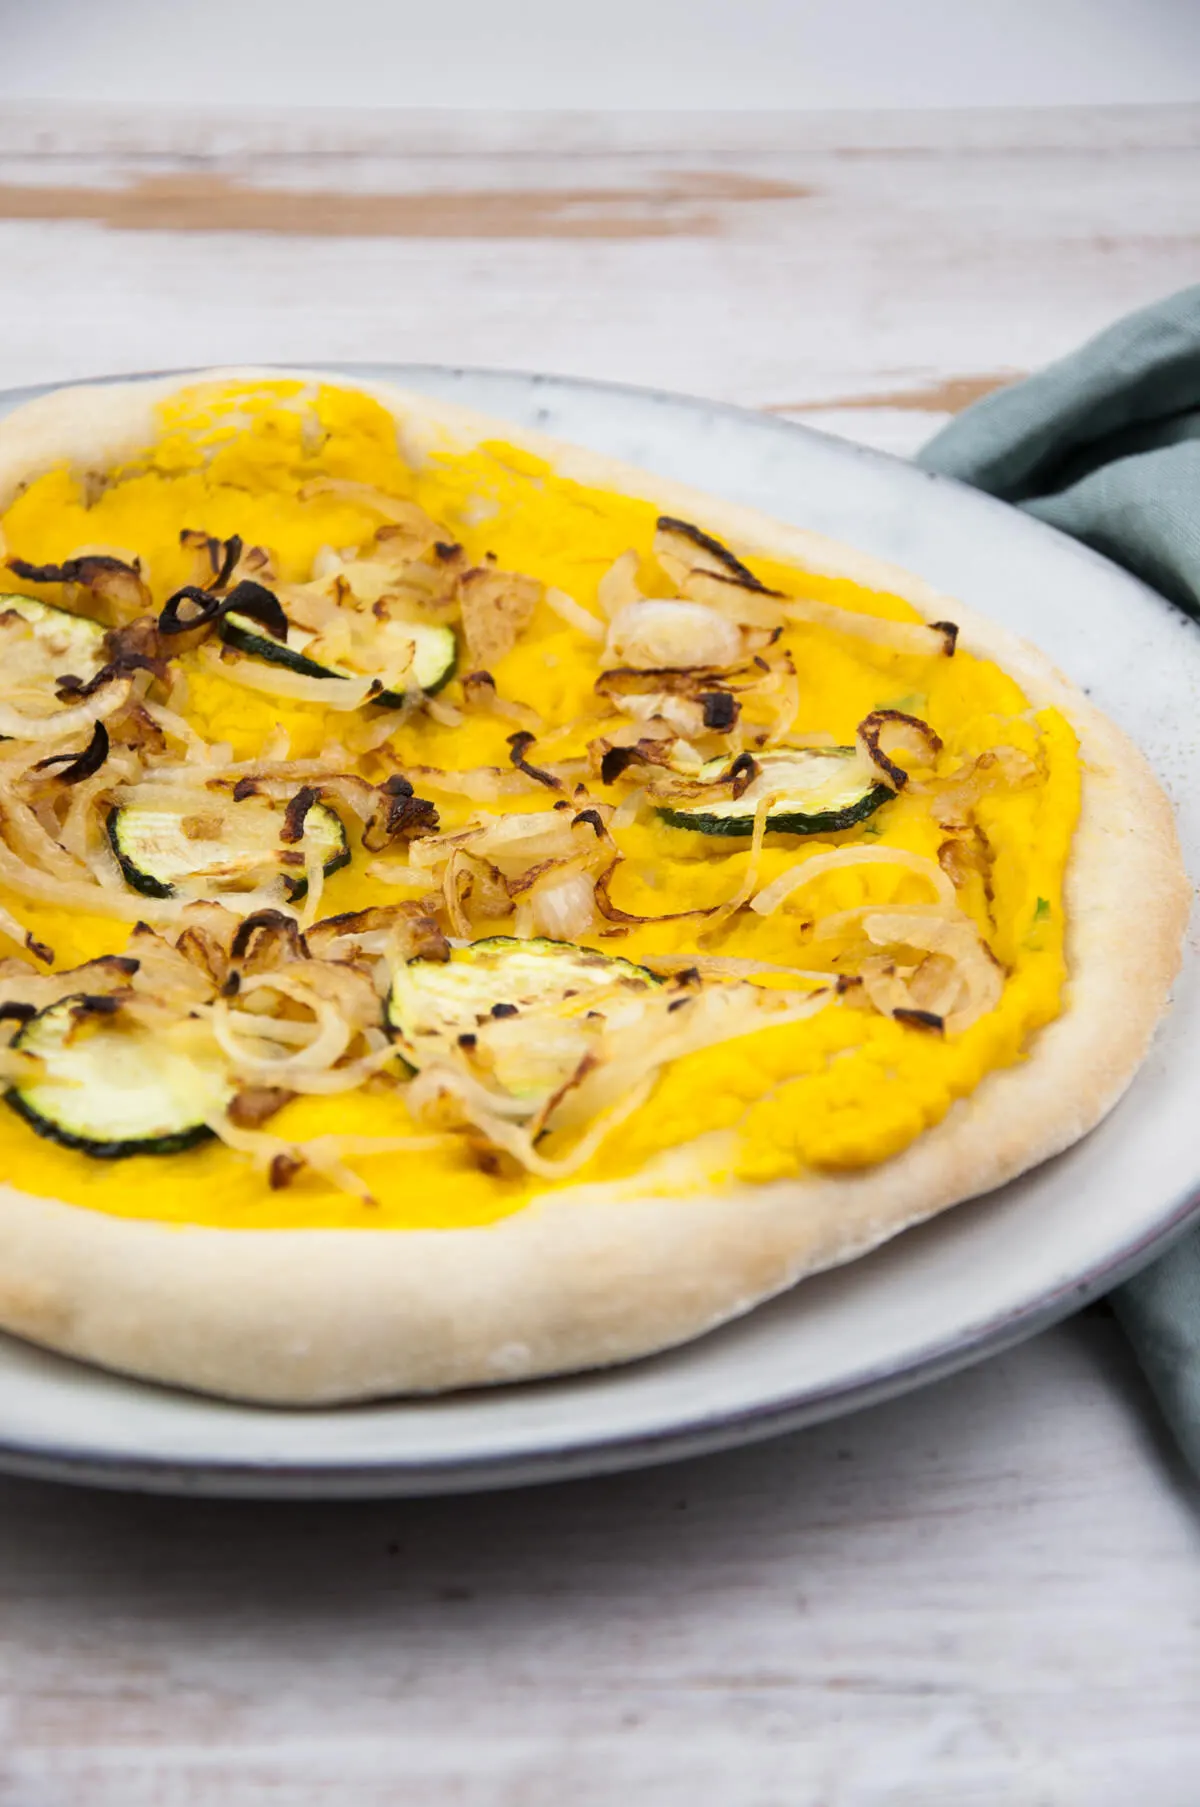 Vegan Pumpkin Pizza with caramelized onions and zucchini